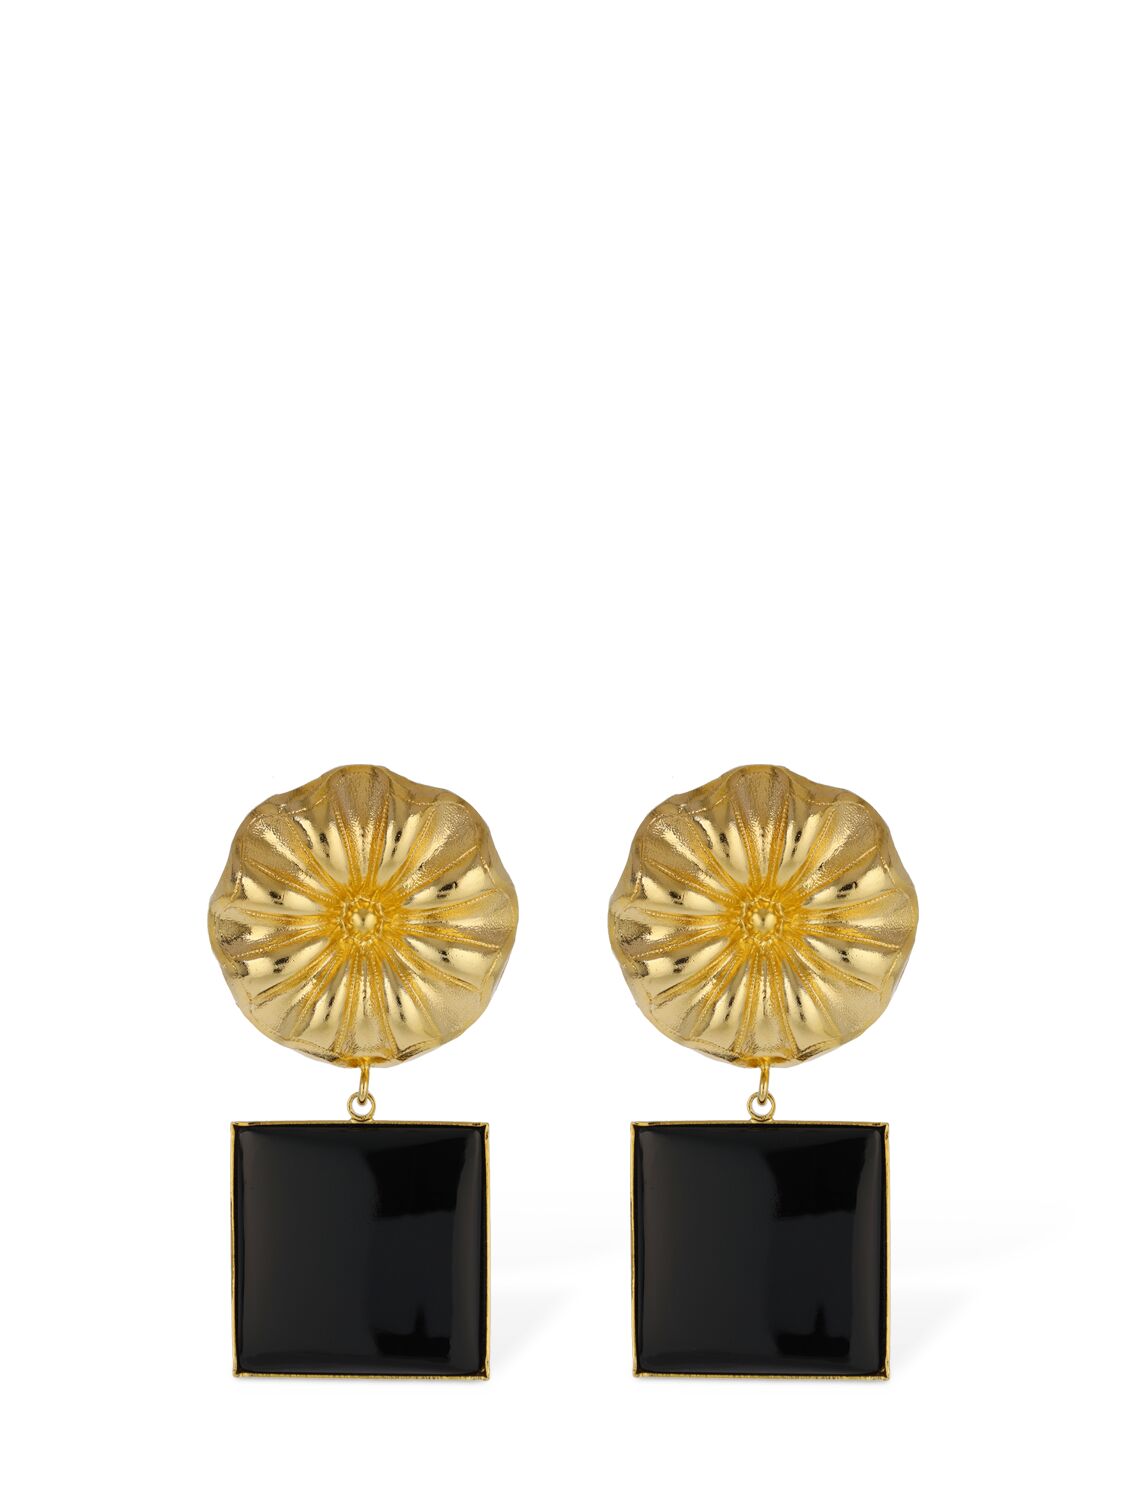 Image of Sonia Daisy Square Earrings